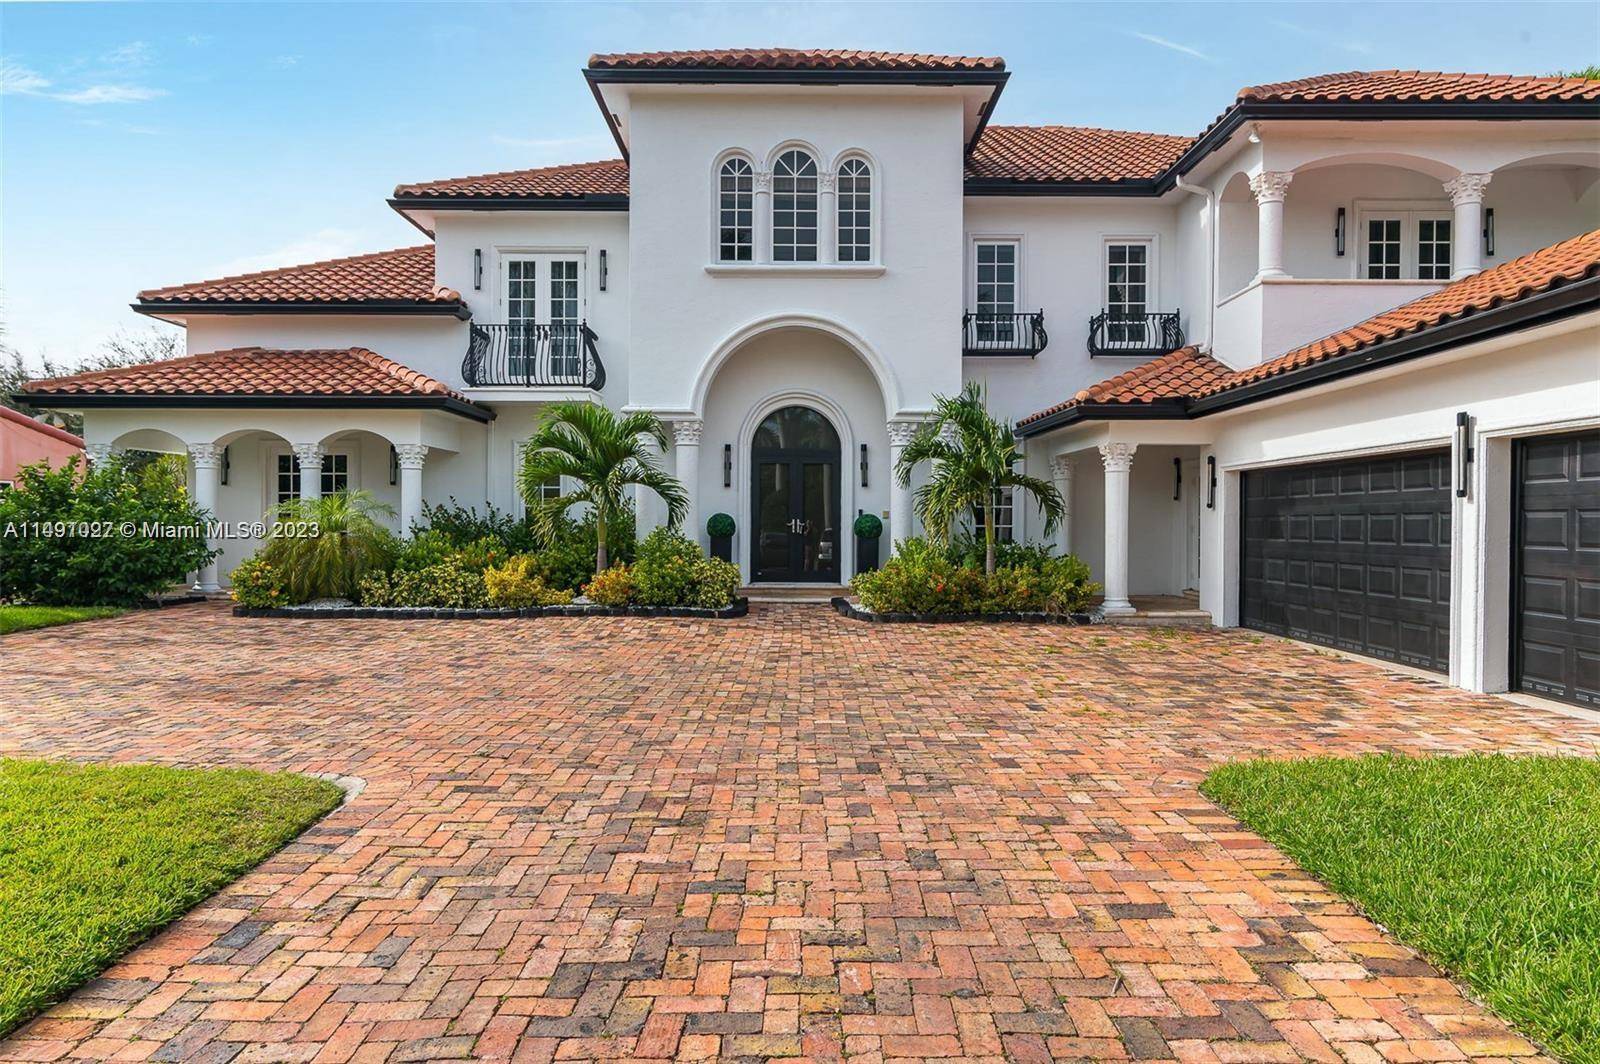 MAGNIFICIENT WATERFRONT GATED ESTATE ON 1 3 OF AN ACRE LOT IN PRESTIGIOUS EAST CORAL RIDGE IN SOUGHT AFTER BAYVIEW SCHOOL DISTRICT.